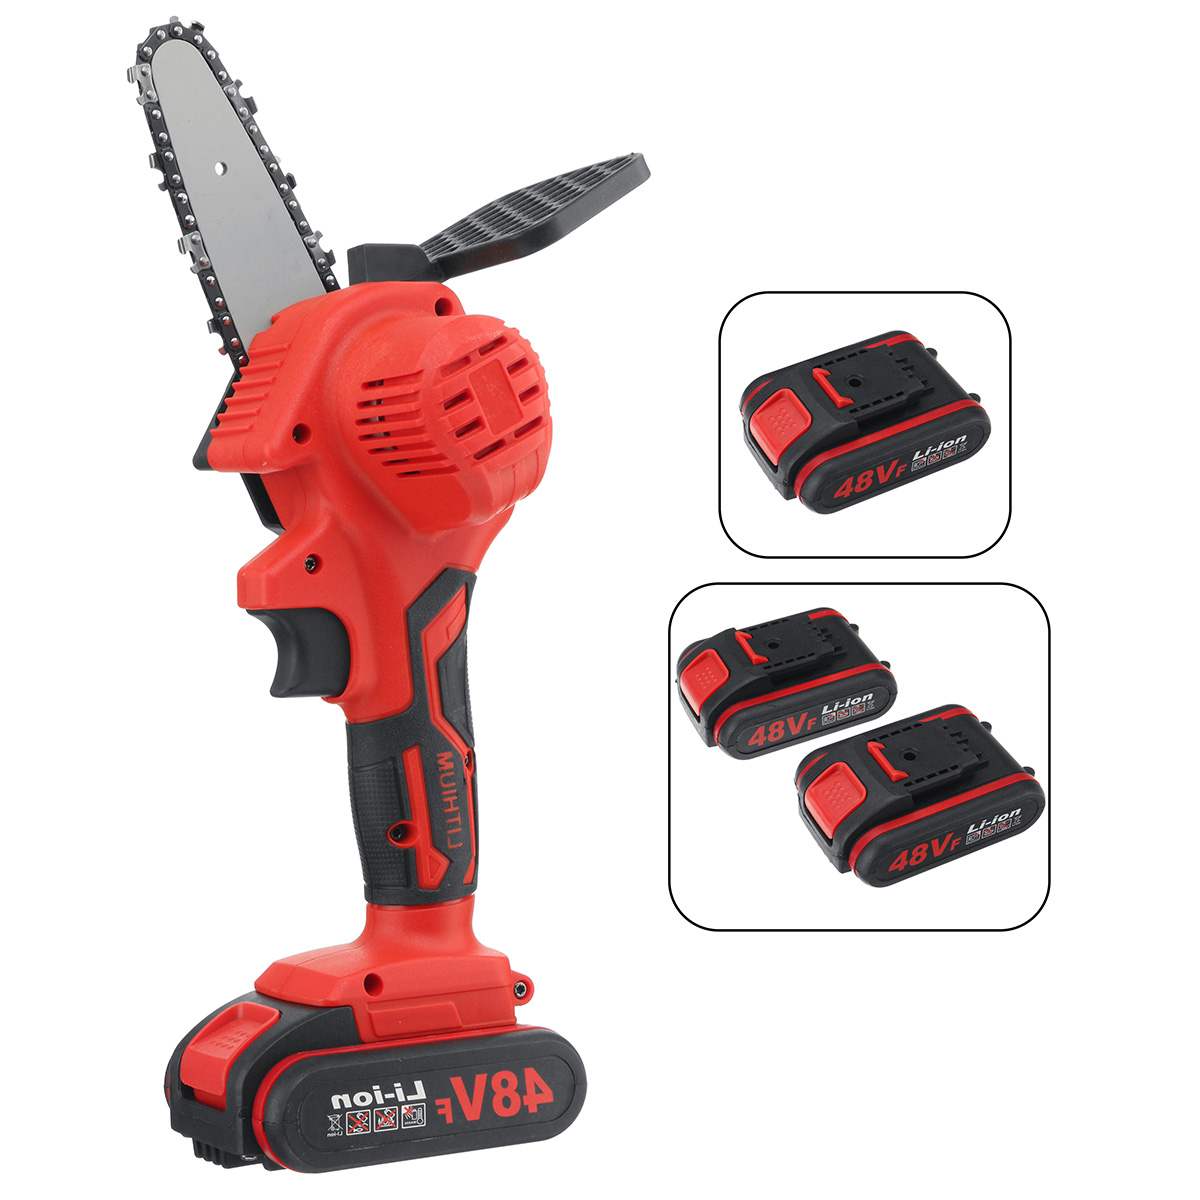 21V-Rechargeable-Electric-Chain-Saw-Portable-Woodworking-Saw-Cordless-Wood-Cutter-W-1pc2pcs-Battery-1786523-9